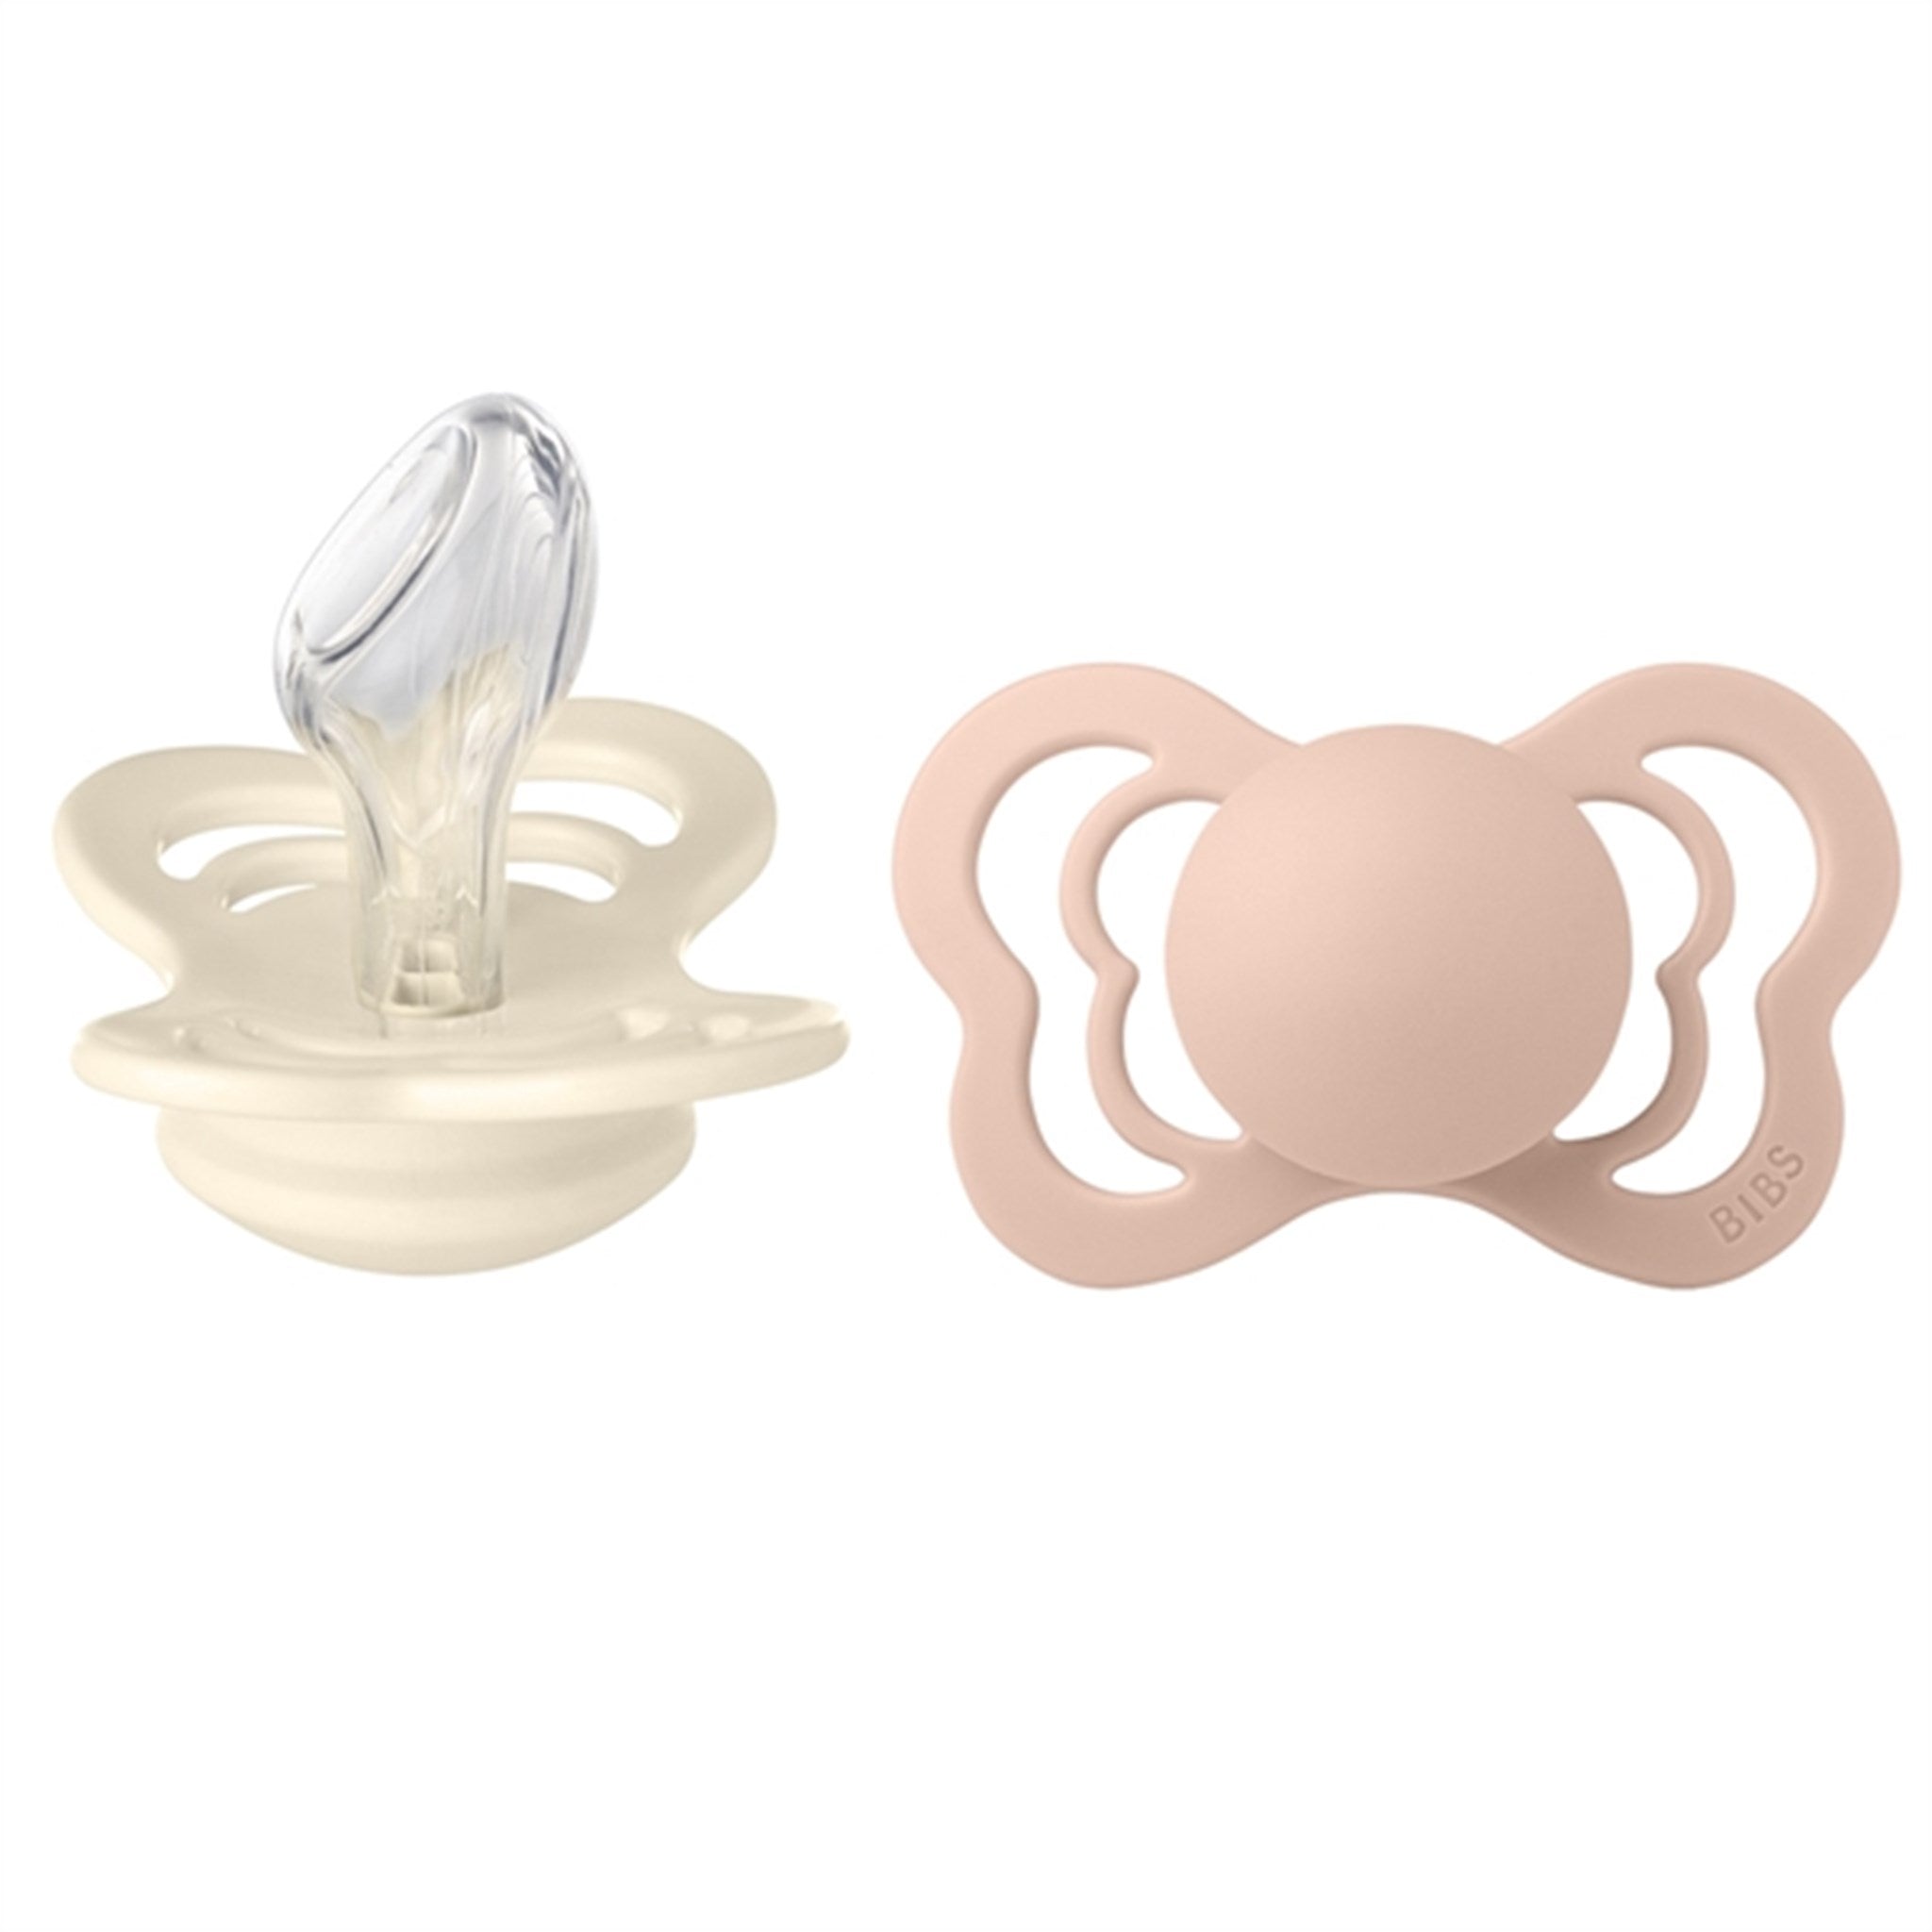 Bibs Couture Silicone Pacifiers 2-pack Anatomical Ivory/Blush